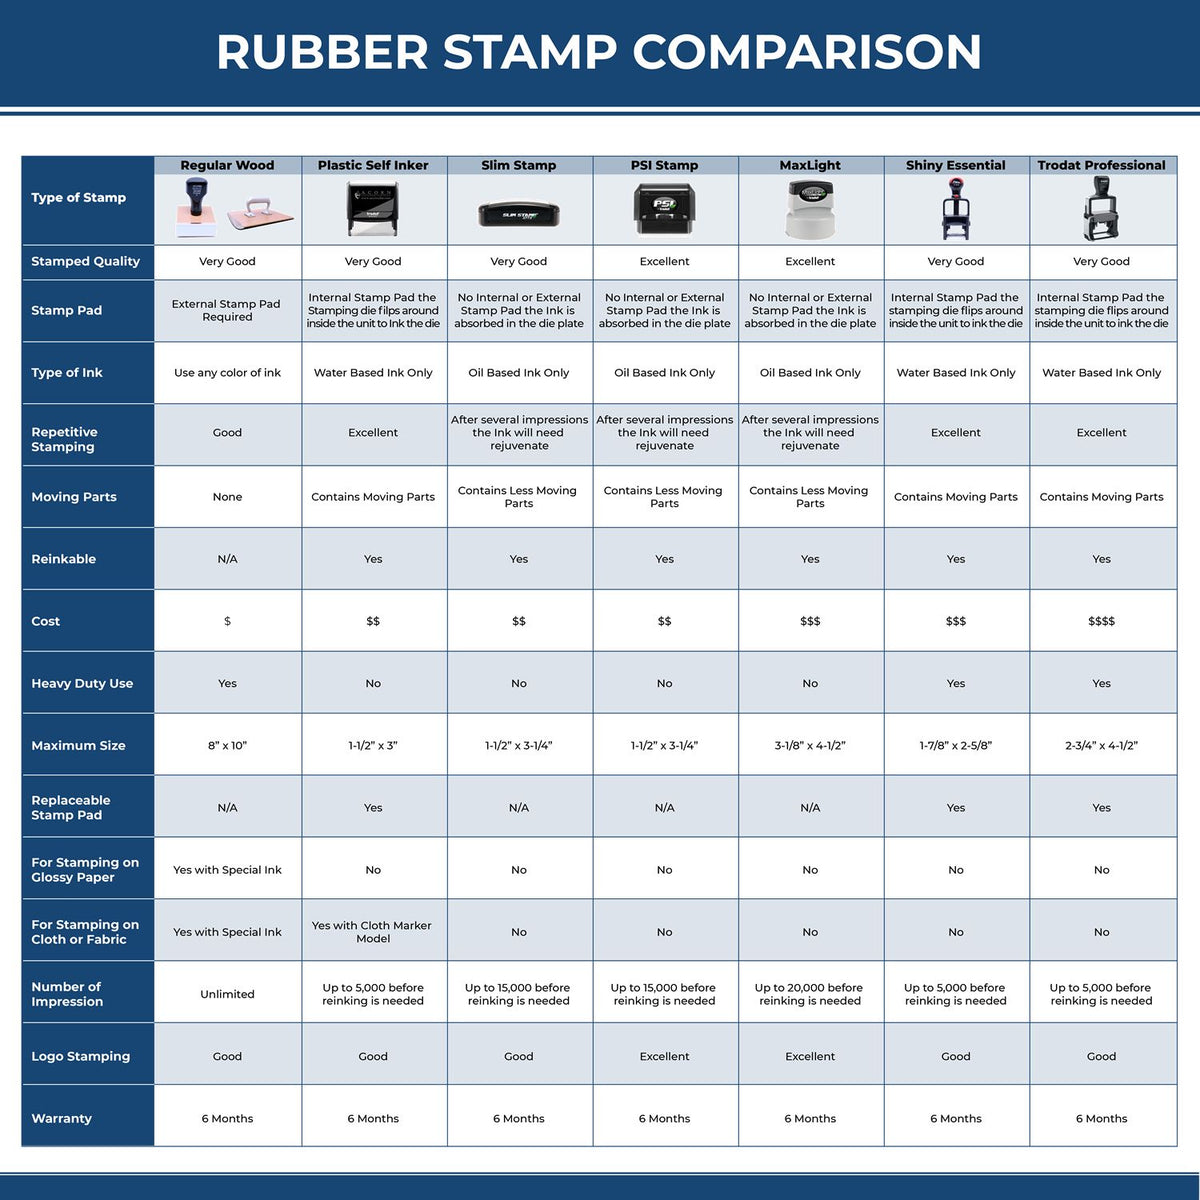 A comparison chart for the different types of mount models available for the Premium MaxLight Pre-Inked Massachusetts Landscape Architectural Stamp.